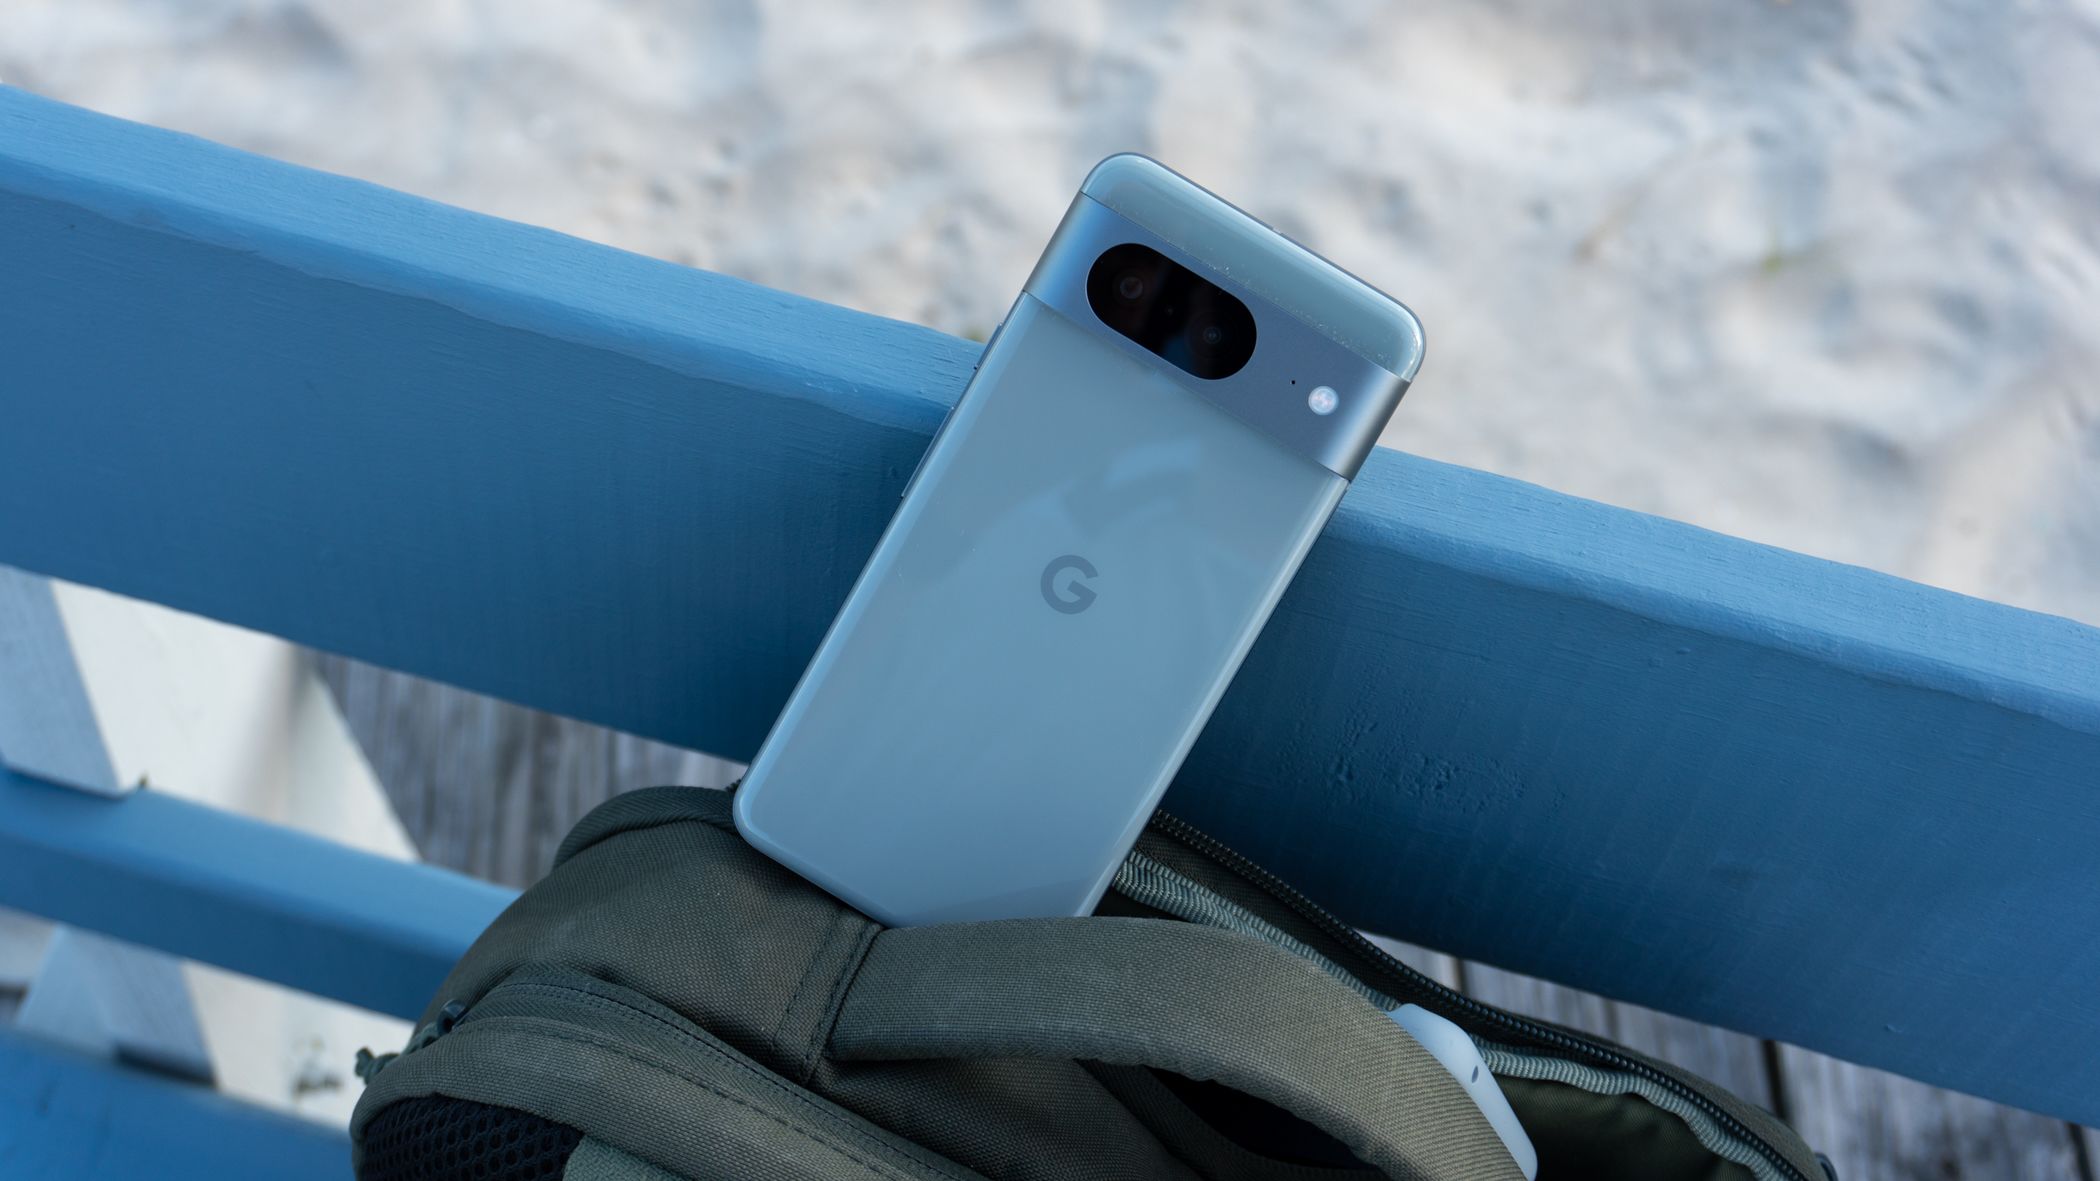 Google Pixel 6a Review: Changing the mid-range Pixel philosophy